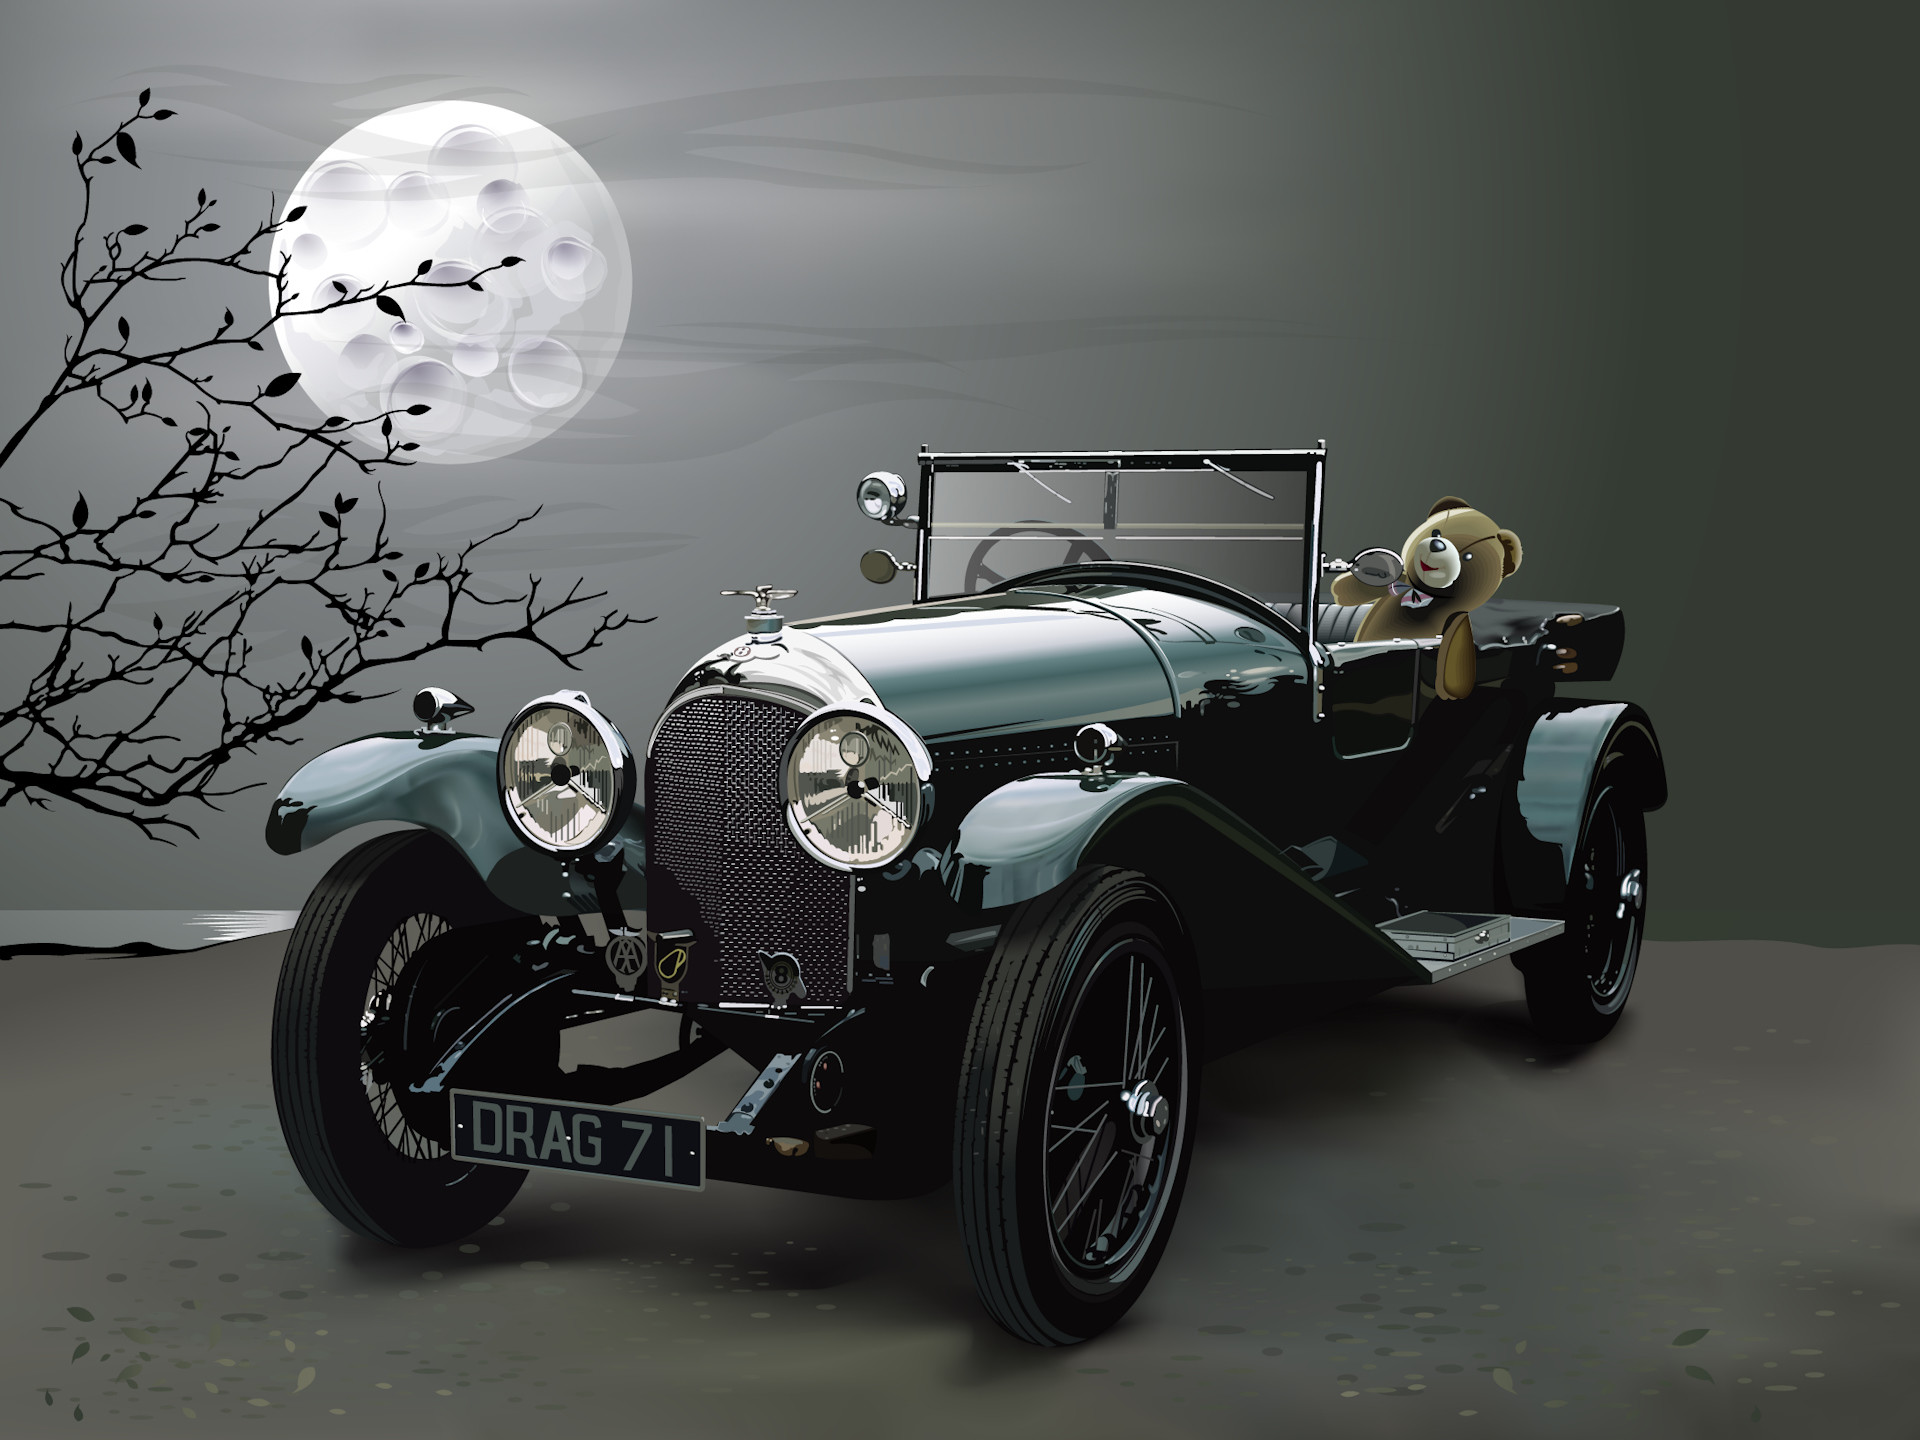 1920x1440 Oldtimer | Free Desktop Wallpapers For Widescreen, HD And Mobile